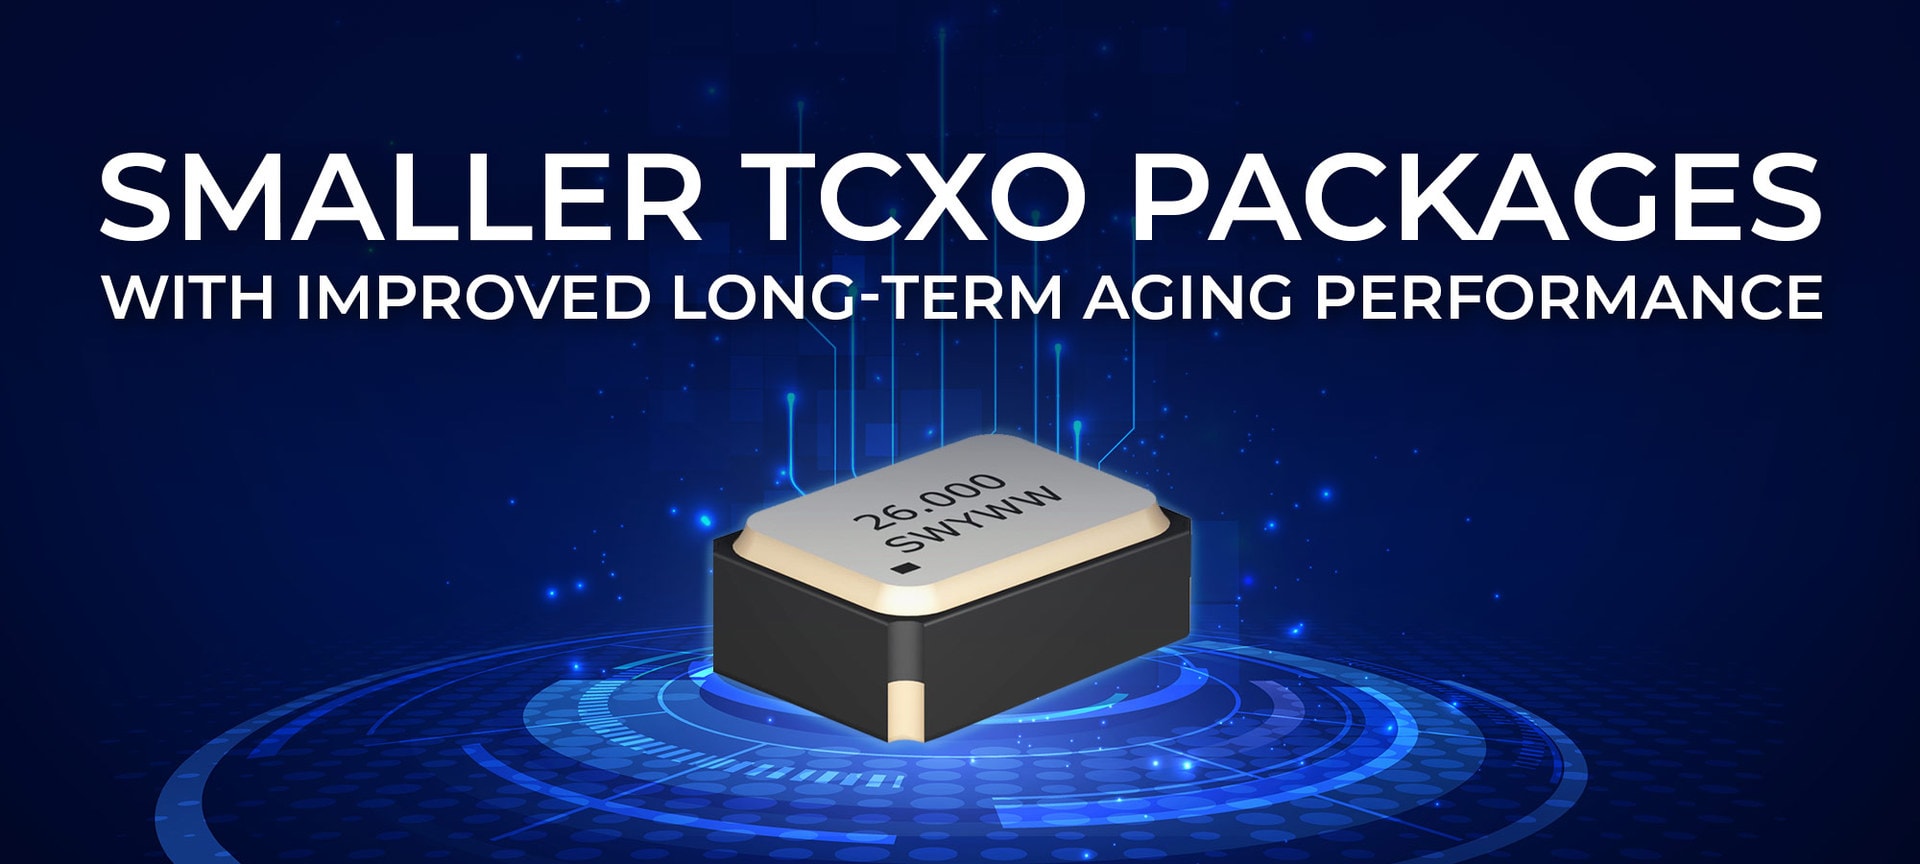 TCXO Packages with Improved Long-Term Aging Performance